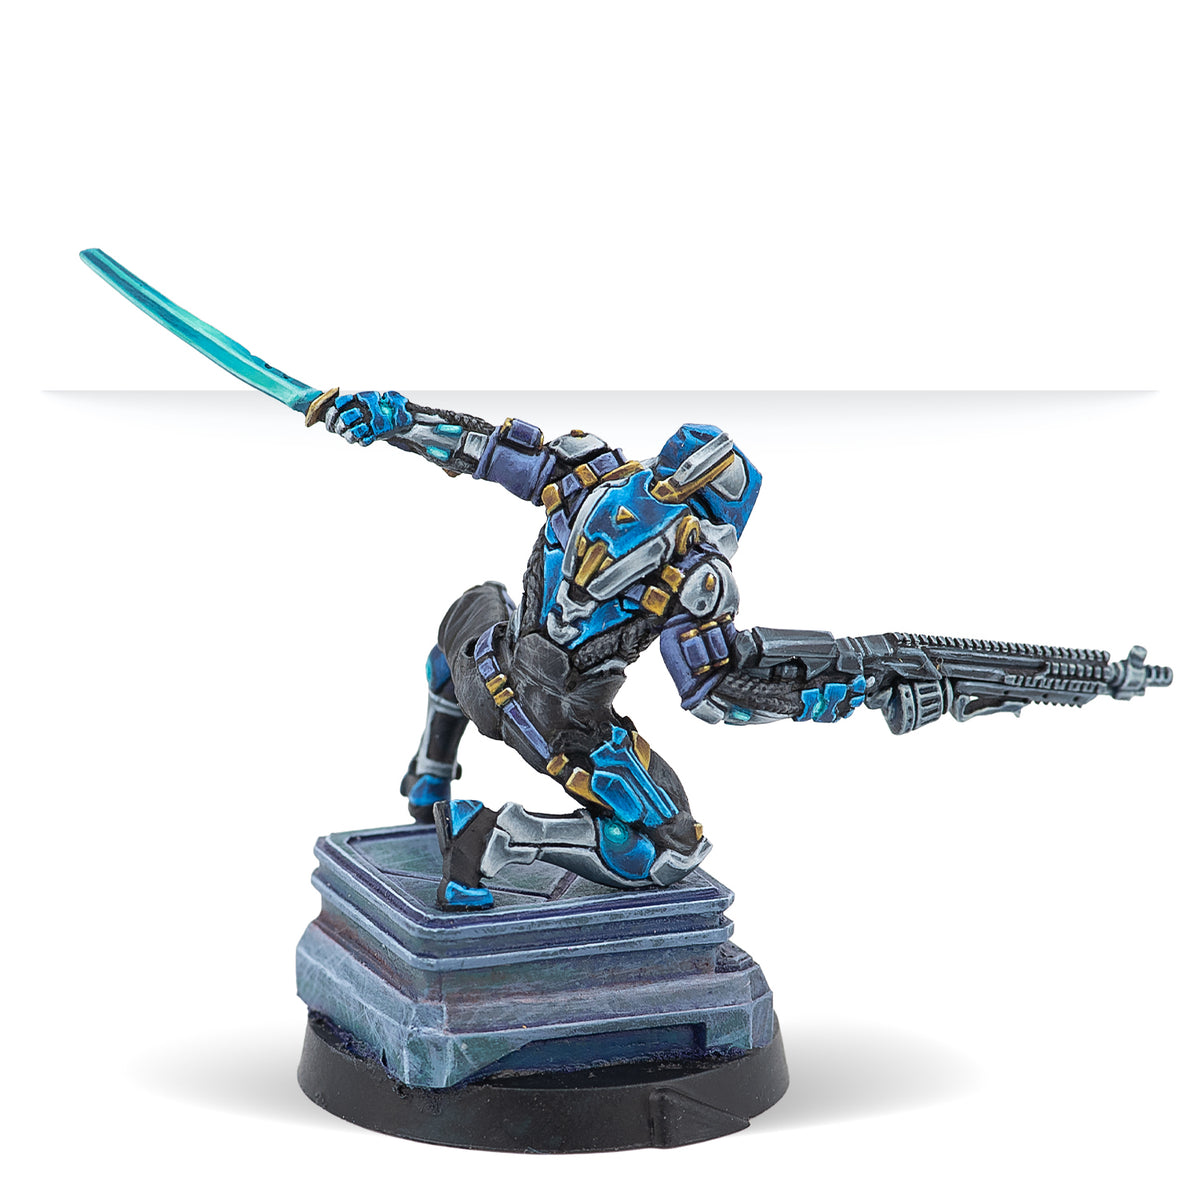 Reinf. Nightshades, Clandestine Action Unit [MAY PRE-ORDER]